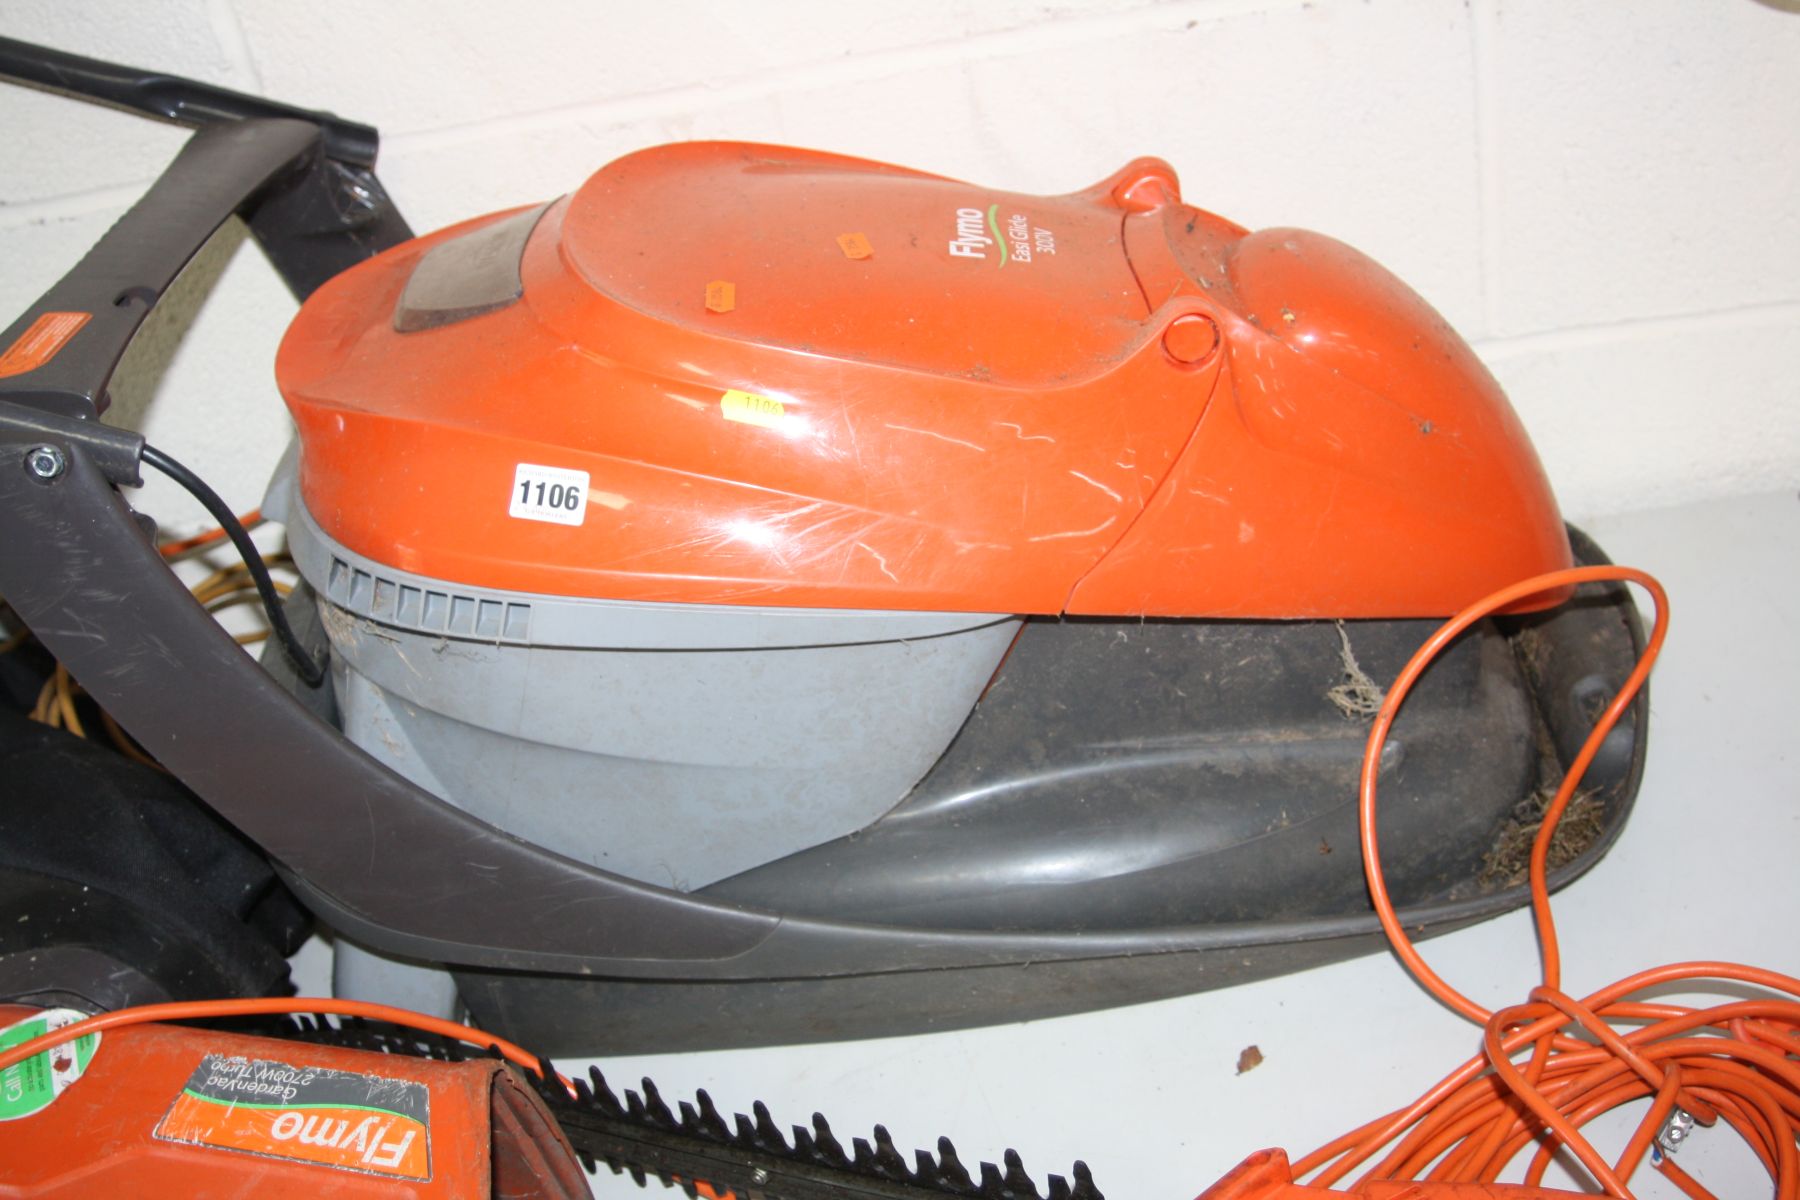 A FLYMO EASYGLIDE 300V LAWN MOWER (untested no cable), a Flymo Garden vac 2700WT turbo garden vac ( - Image 4 of 4